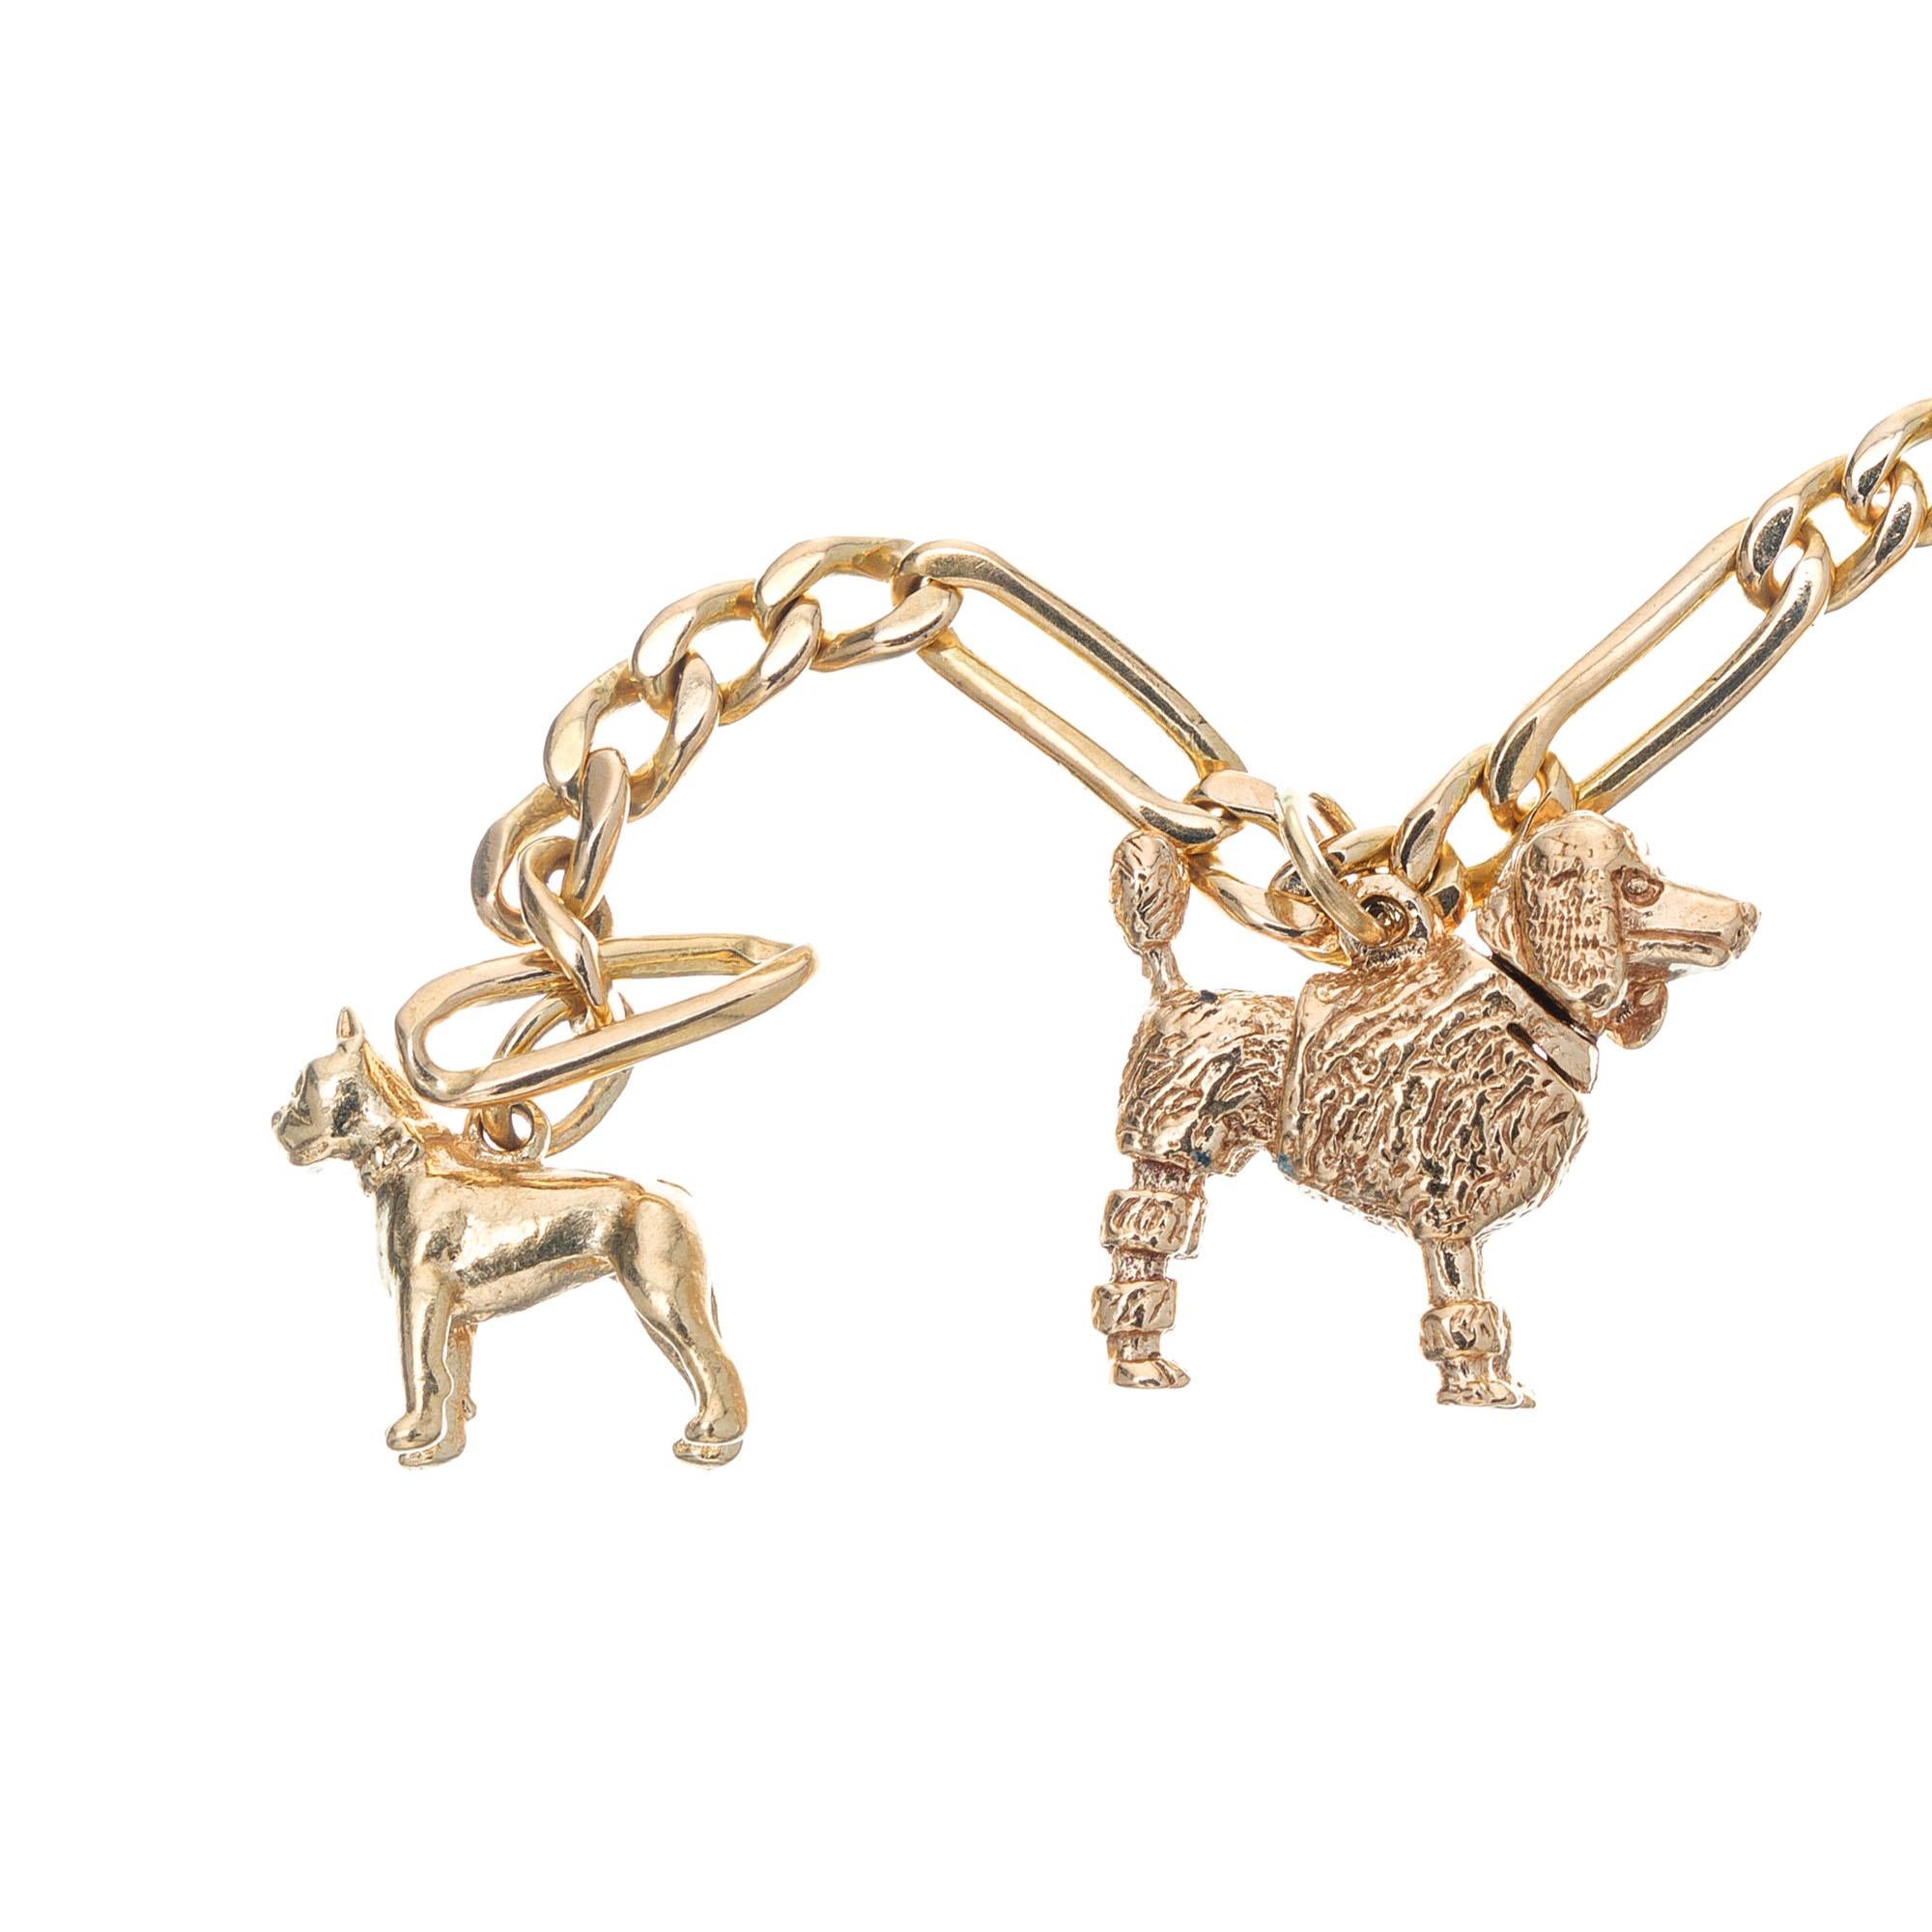 Link charm bracelet with five dog charms. The center charm is 2D, the others are 3D. The poodle and scottie have movable heads. 7.25 inches in length. 

14k yellow gold 
Stamped: 14k
21.0 grams
Chain: 7.25 Inches
